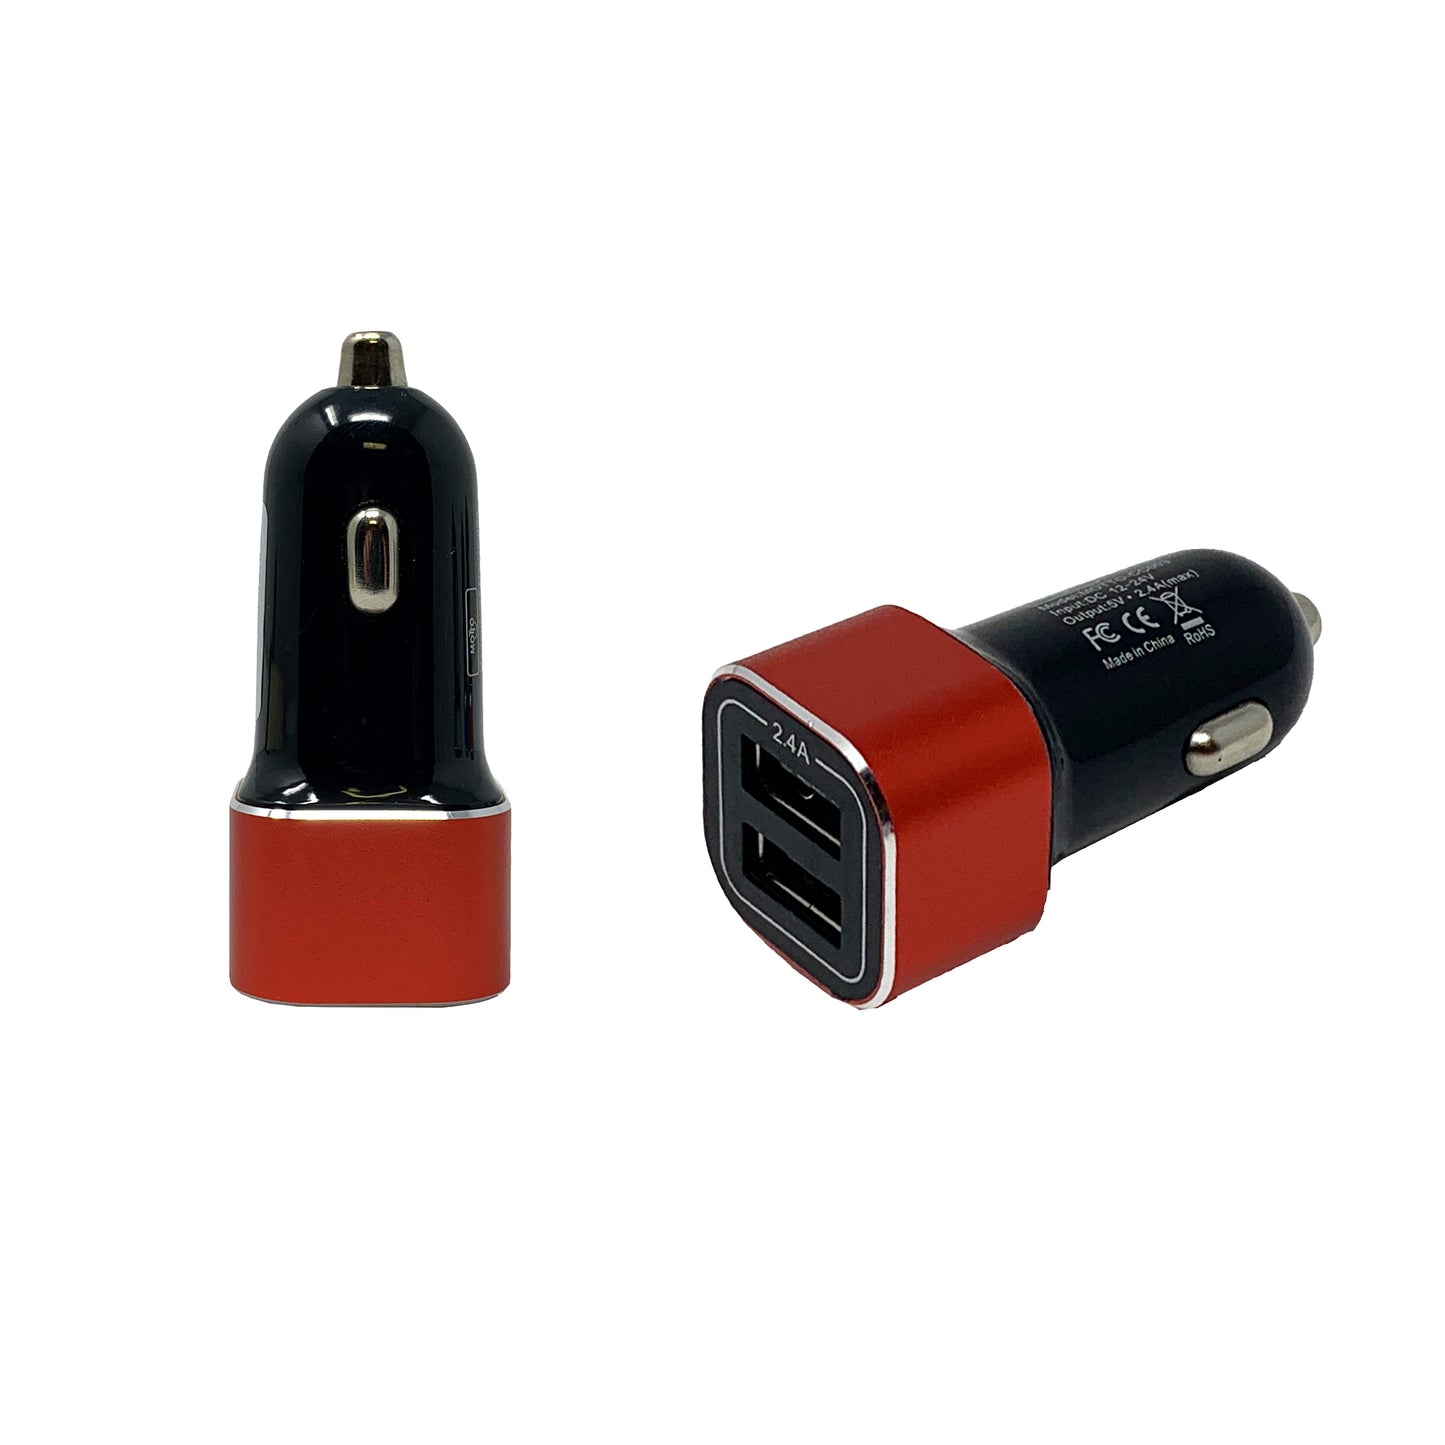 Motto Dual USB Car Charger